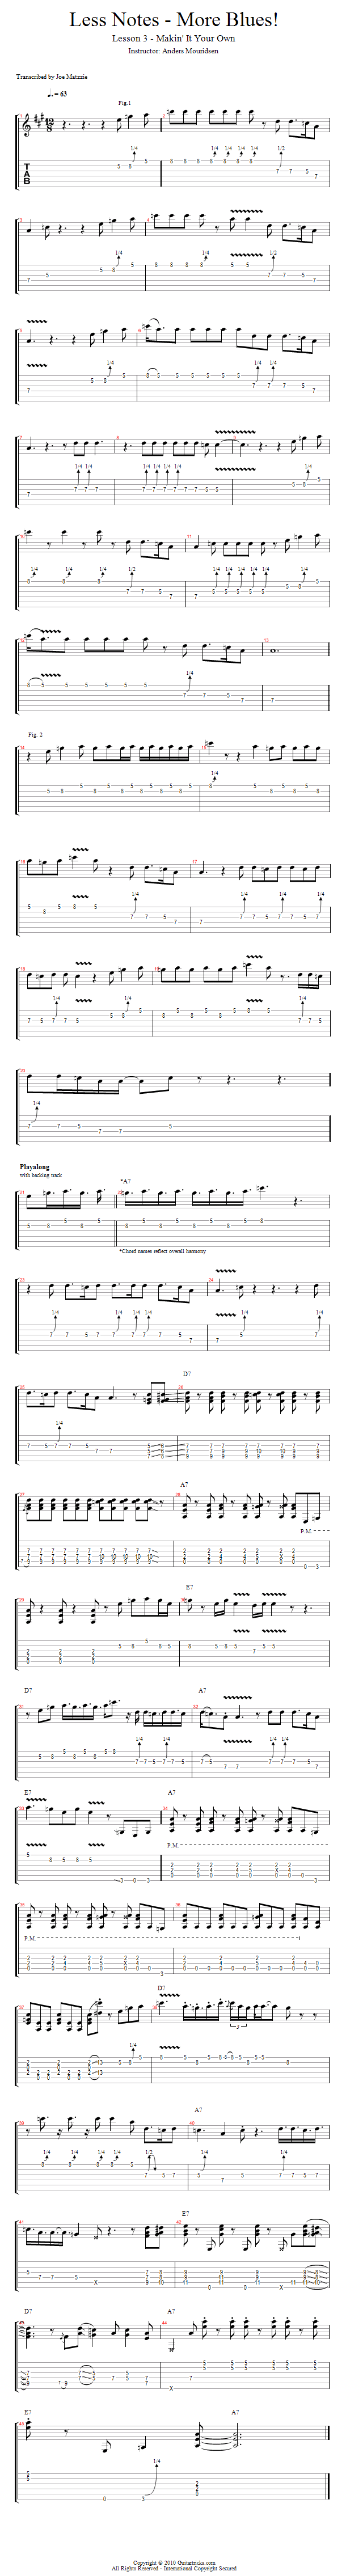 Makin' It Your Own song notation